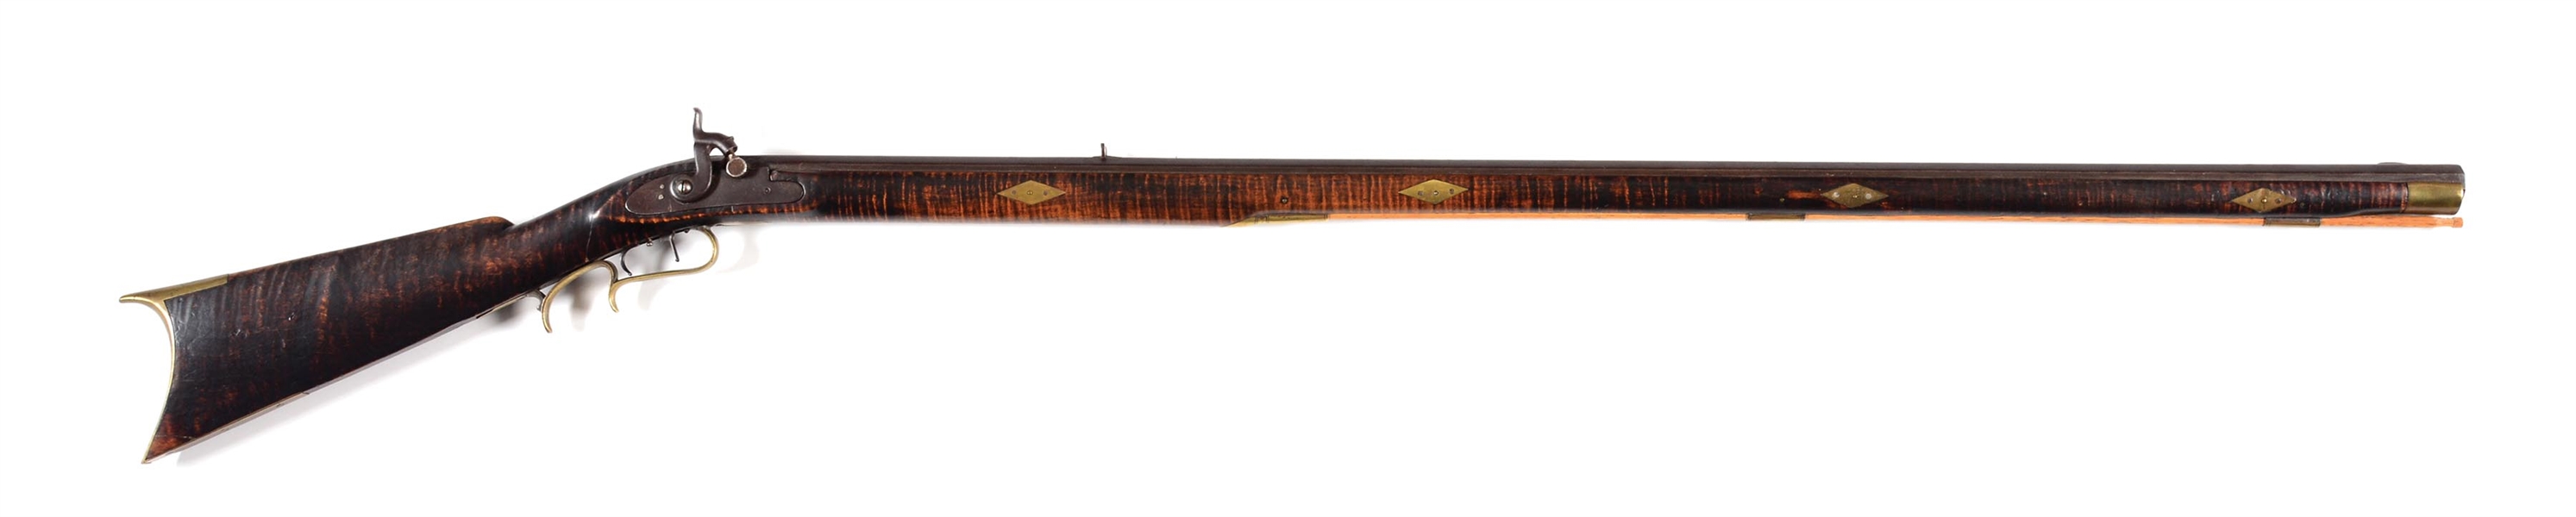 (A) PERCUSSION RIFLE WITH TIGER MAPLE STOCK.